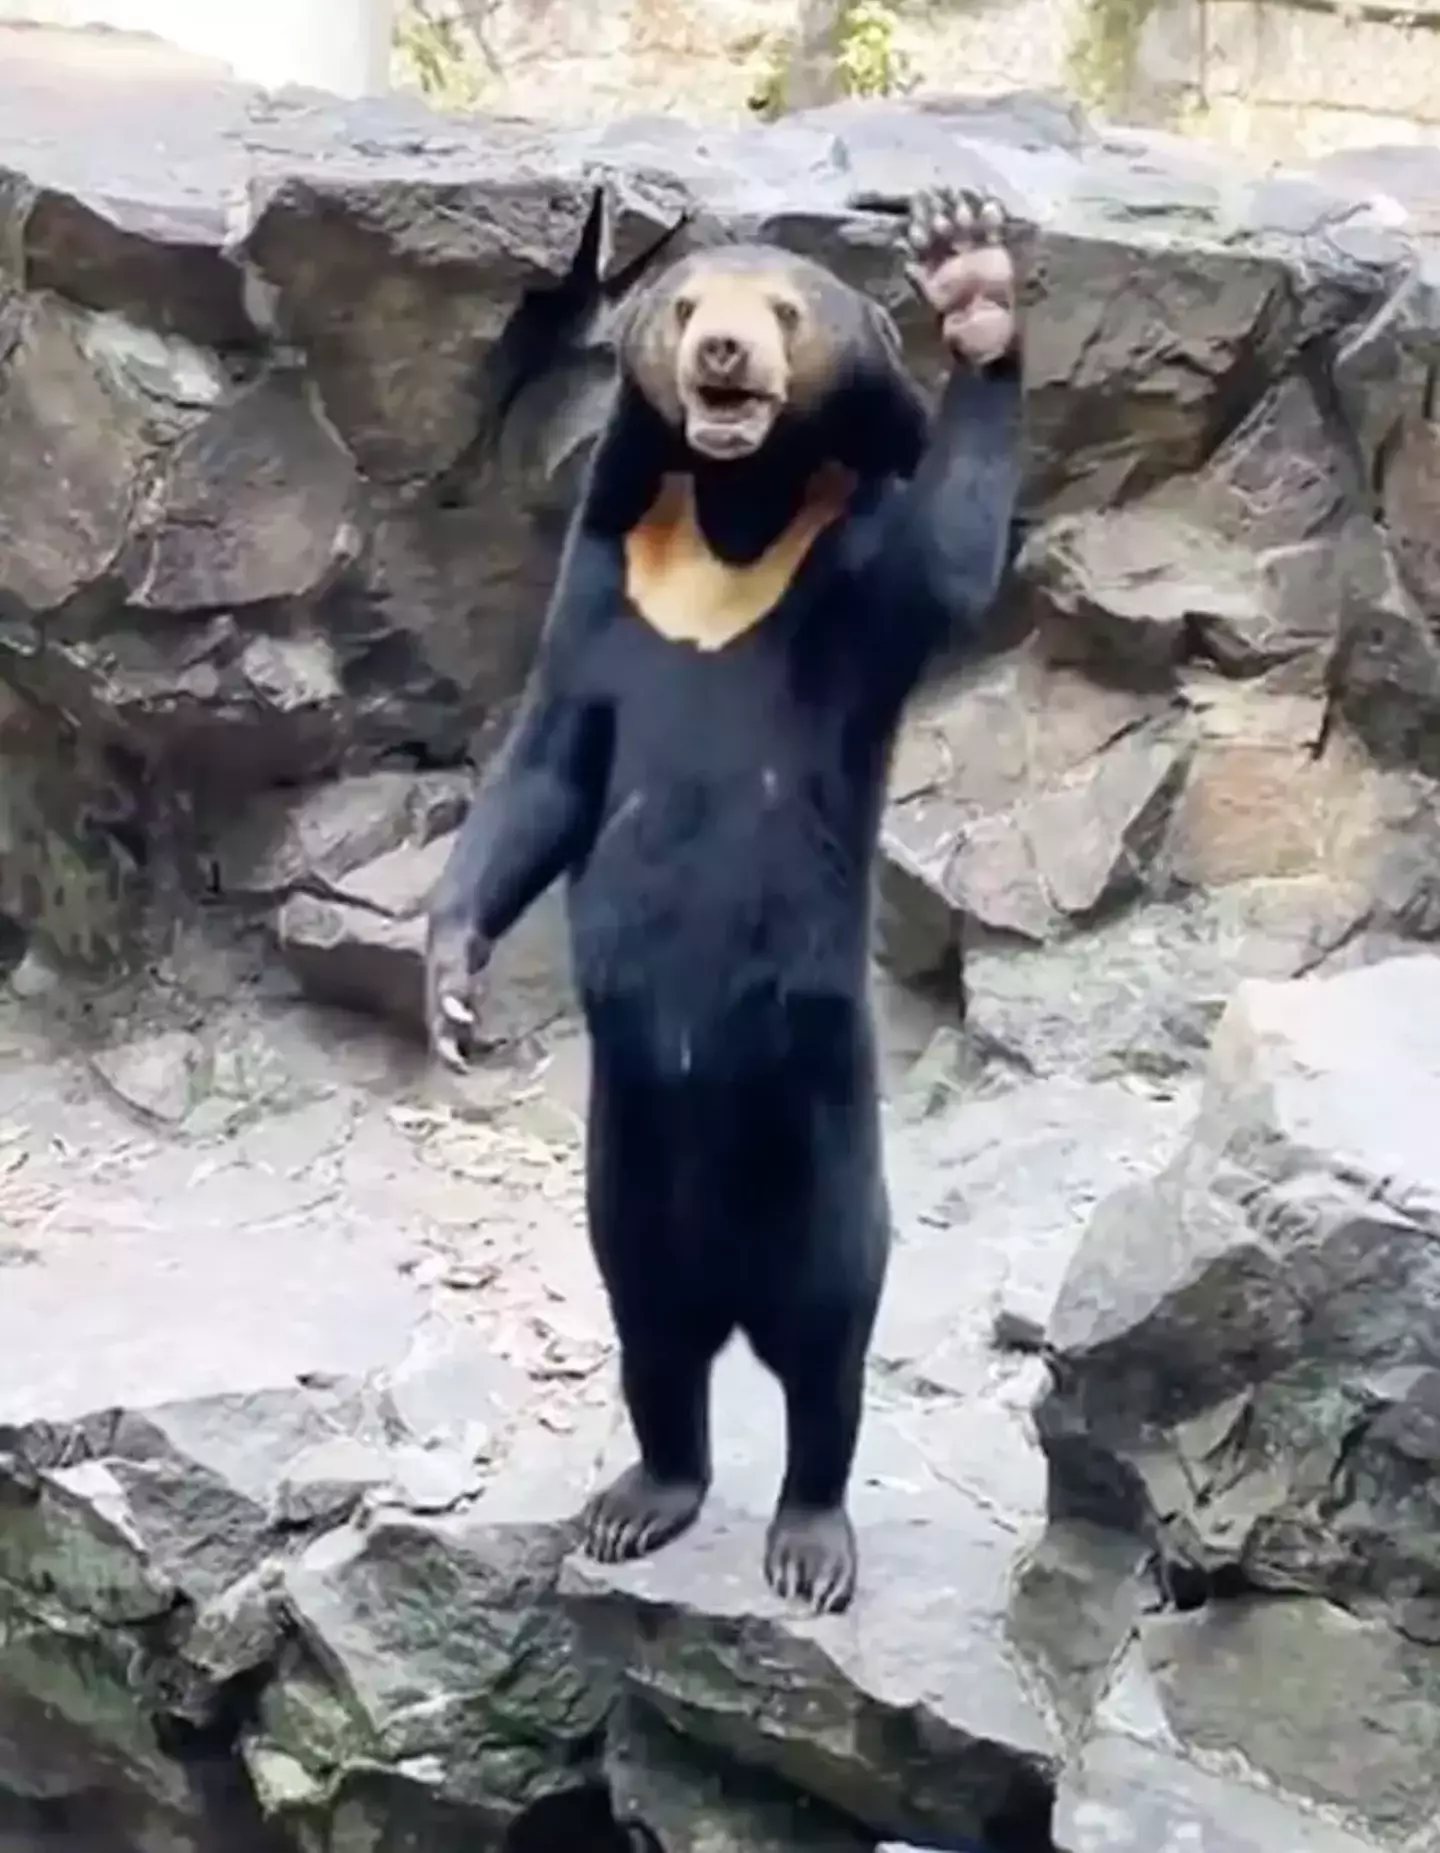 Angela the sun bear got chins wagging earlier this year.